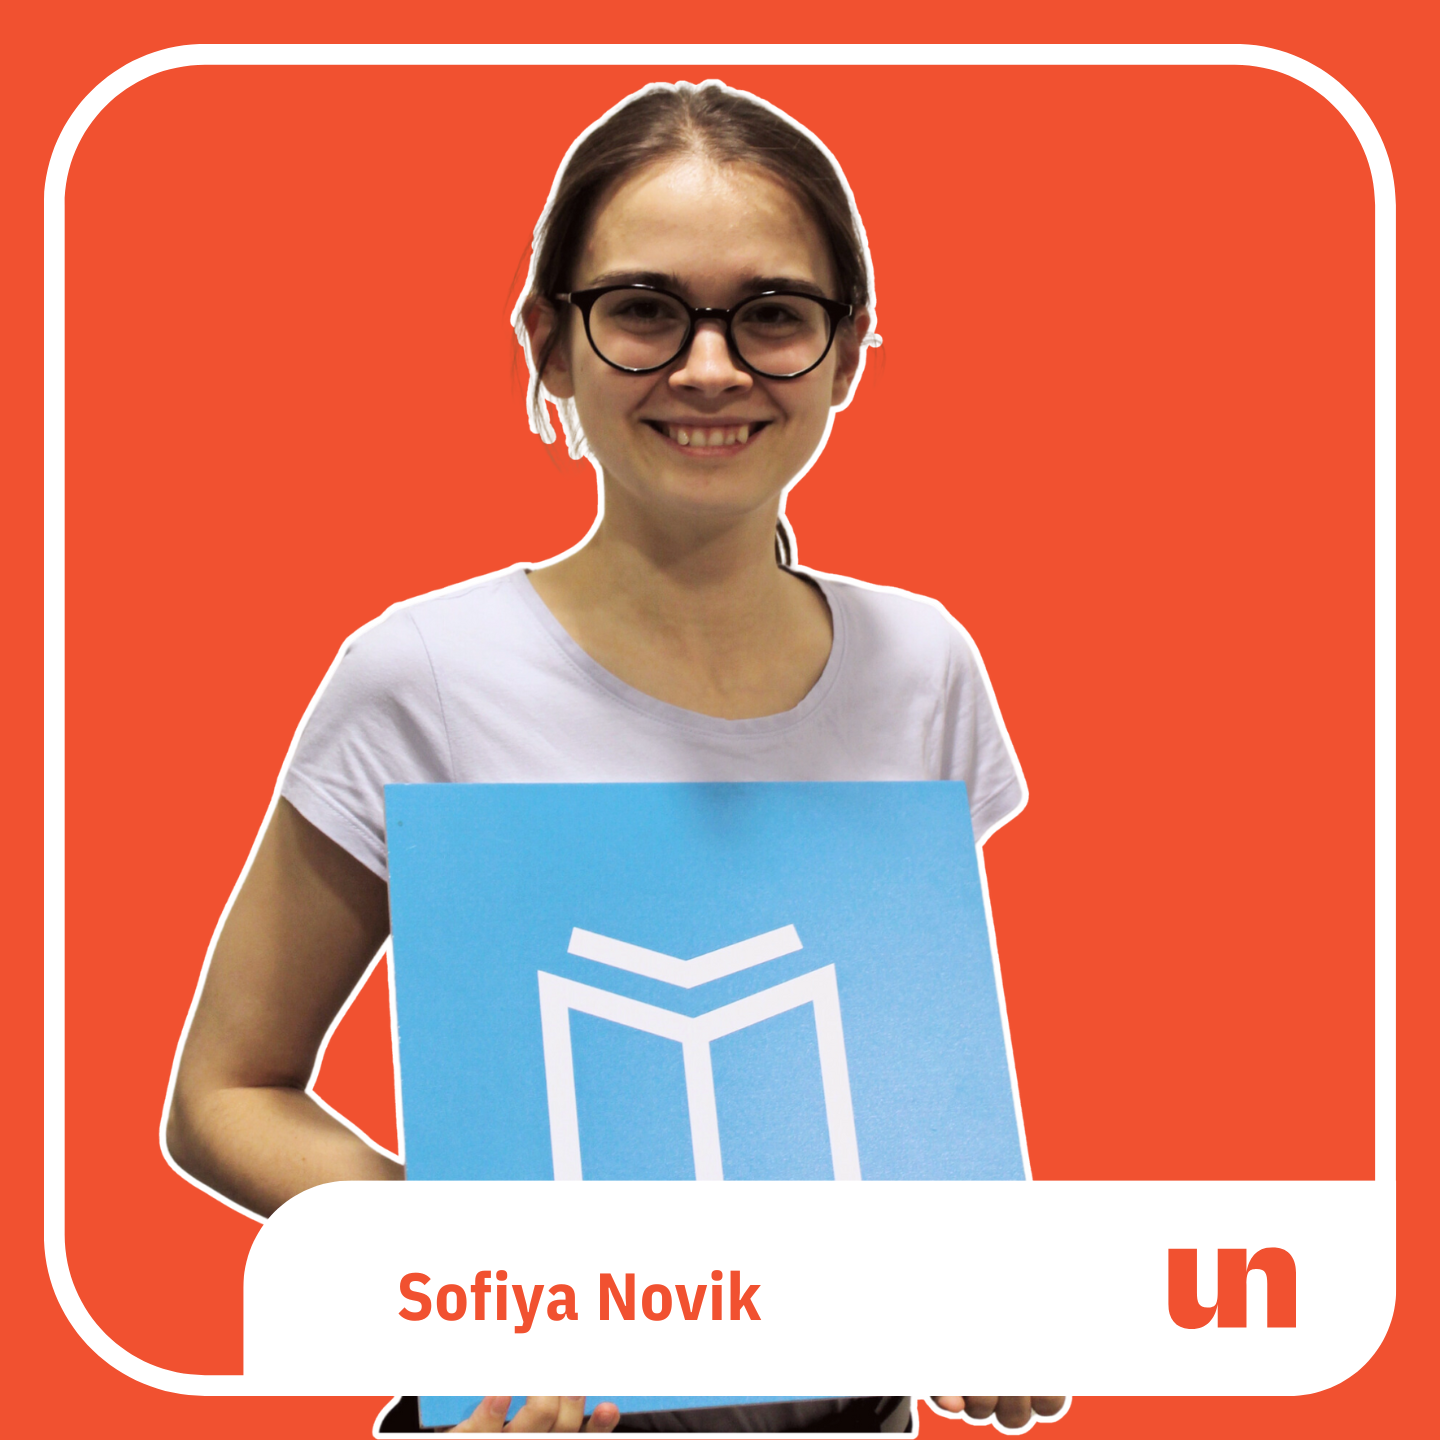 CLICK TO READ MORE ABOUT SOFYA